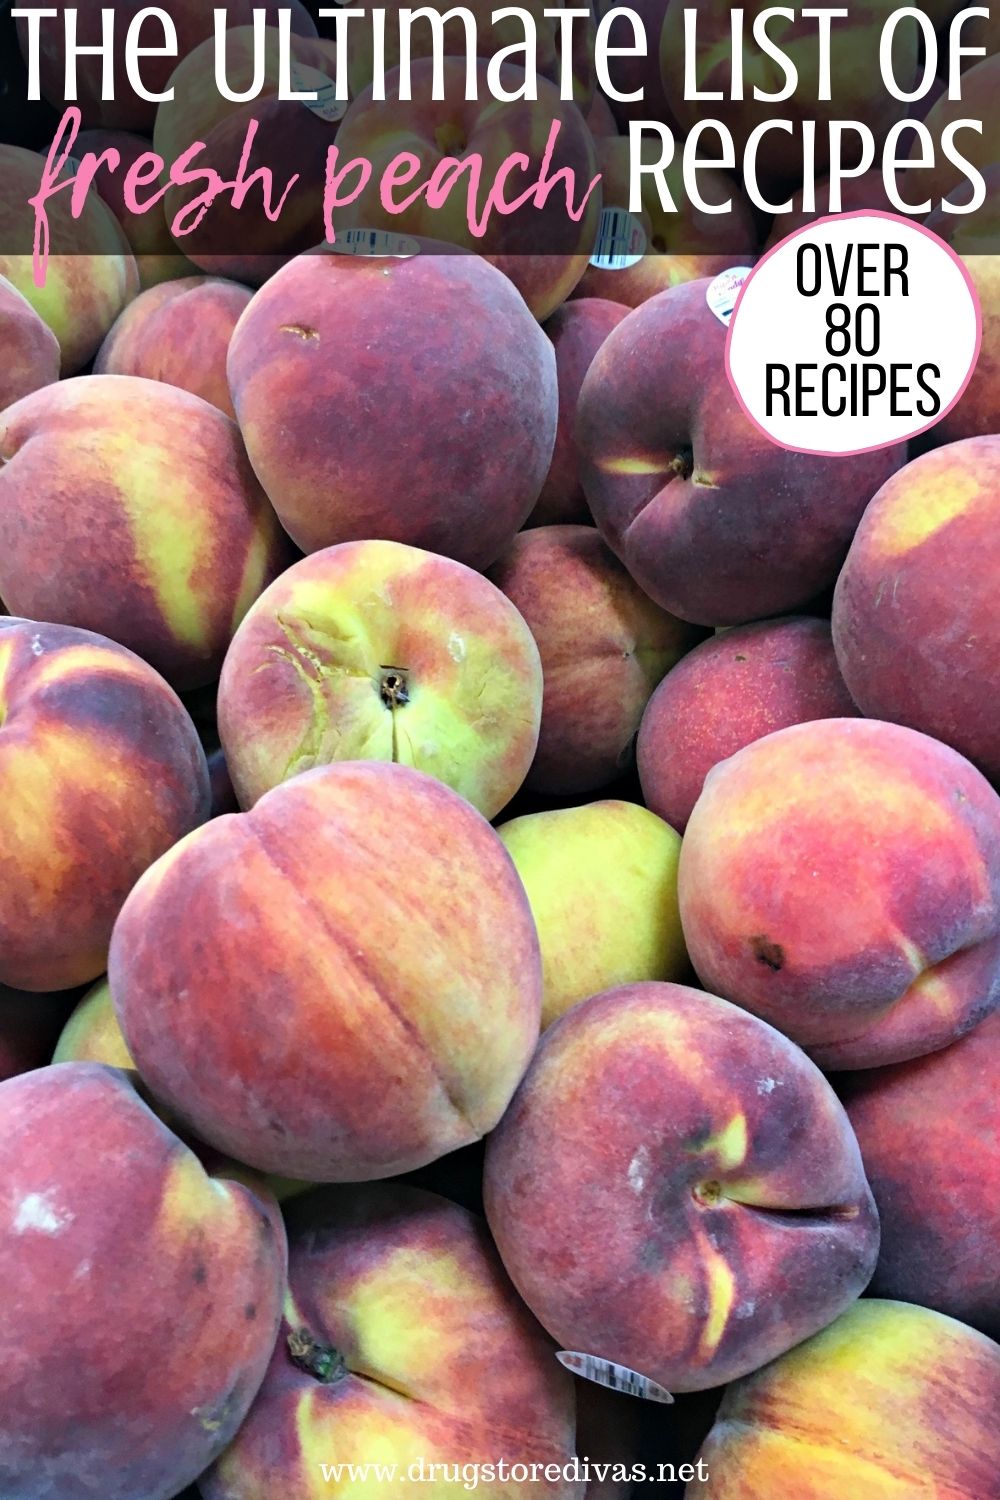 Wondering what to do with fresh peaches? Find over 80 fresh peaches recipes on www.drugstoredivas.net.